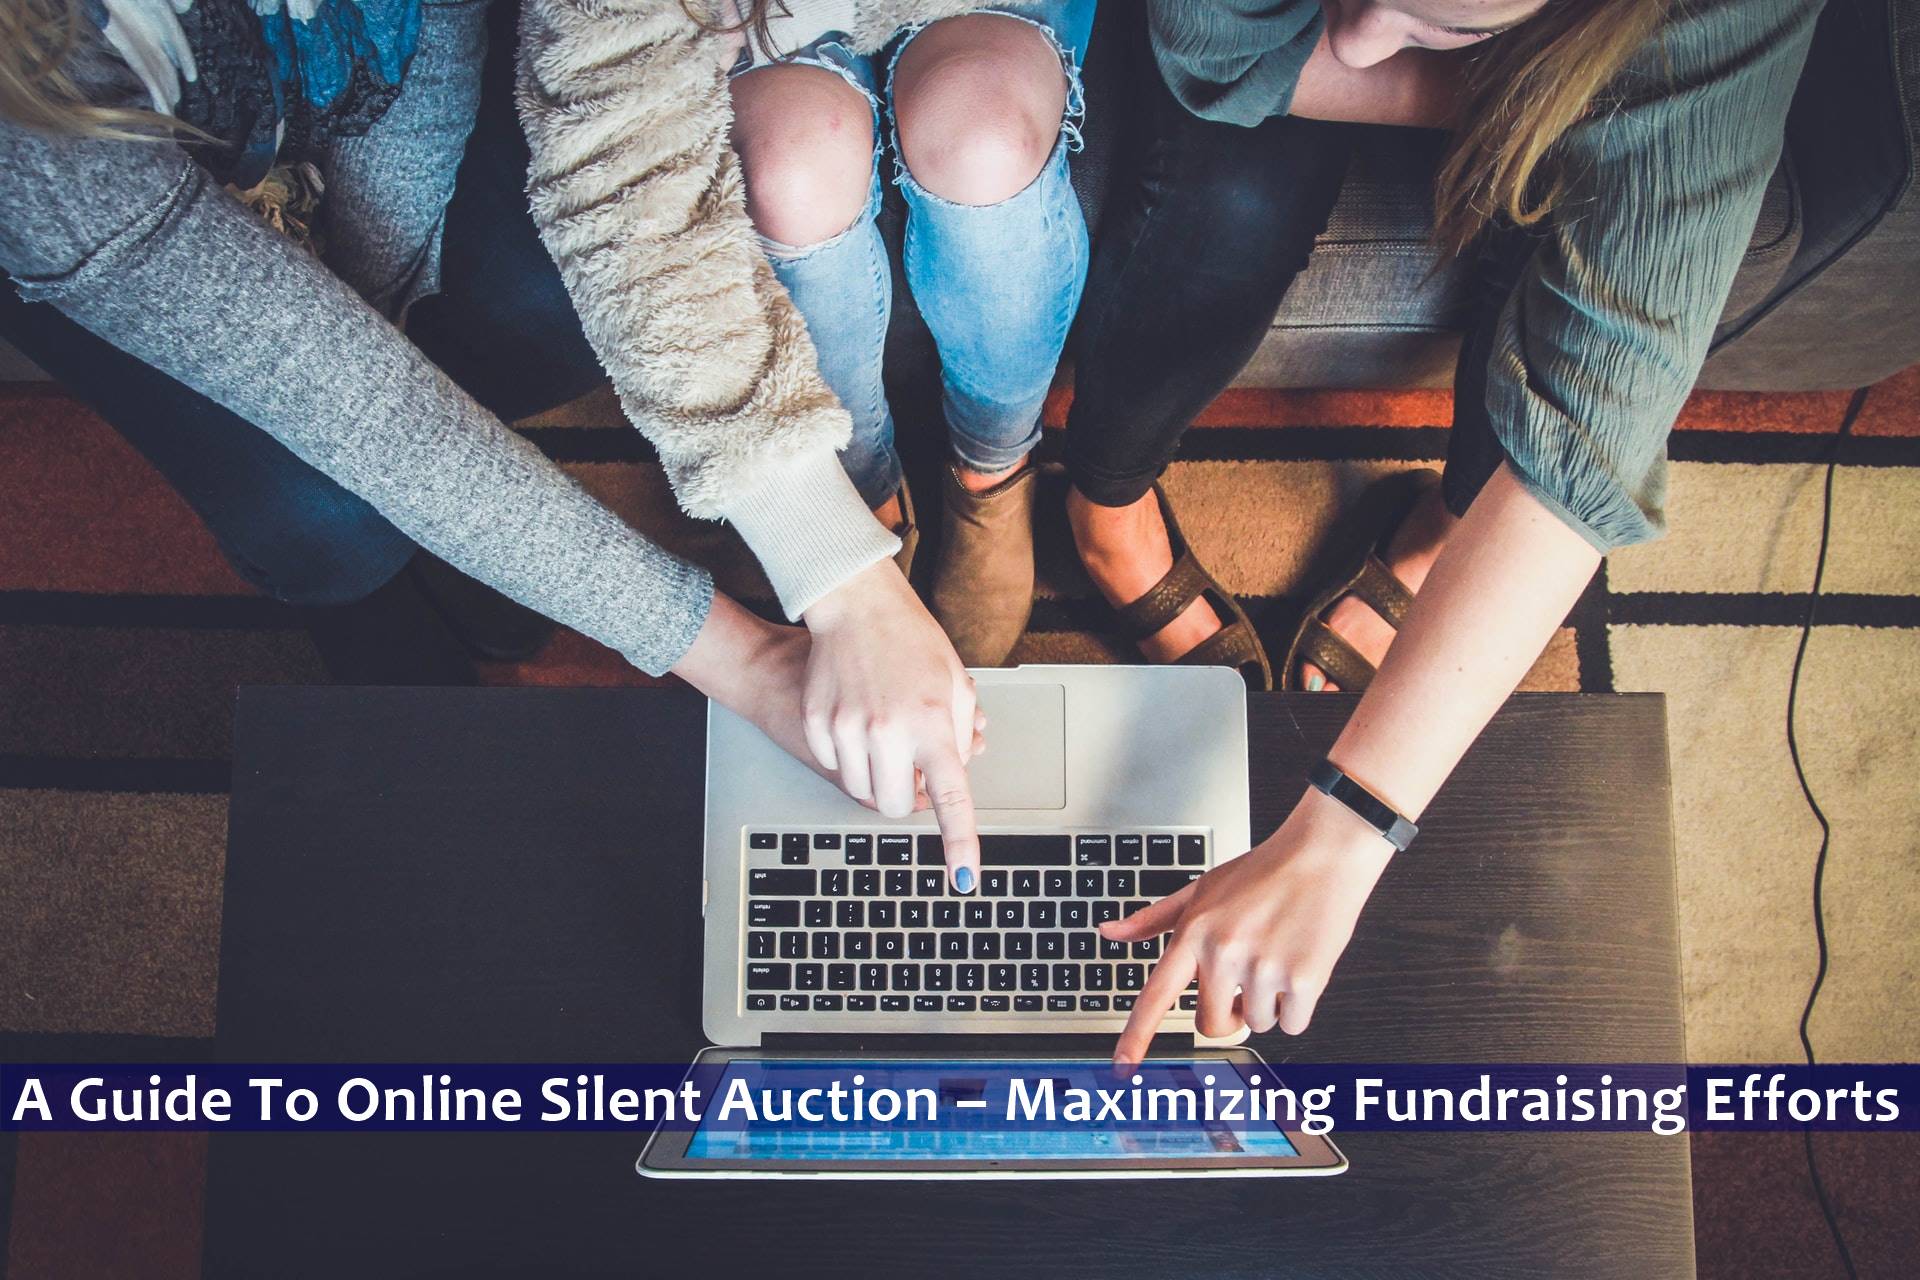 A Guide To Online Silent Auction – Maximizing Fundraising Efforts